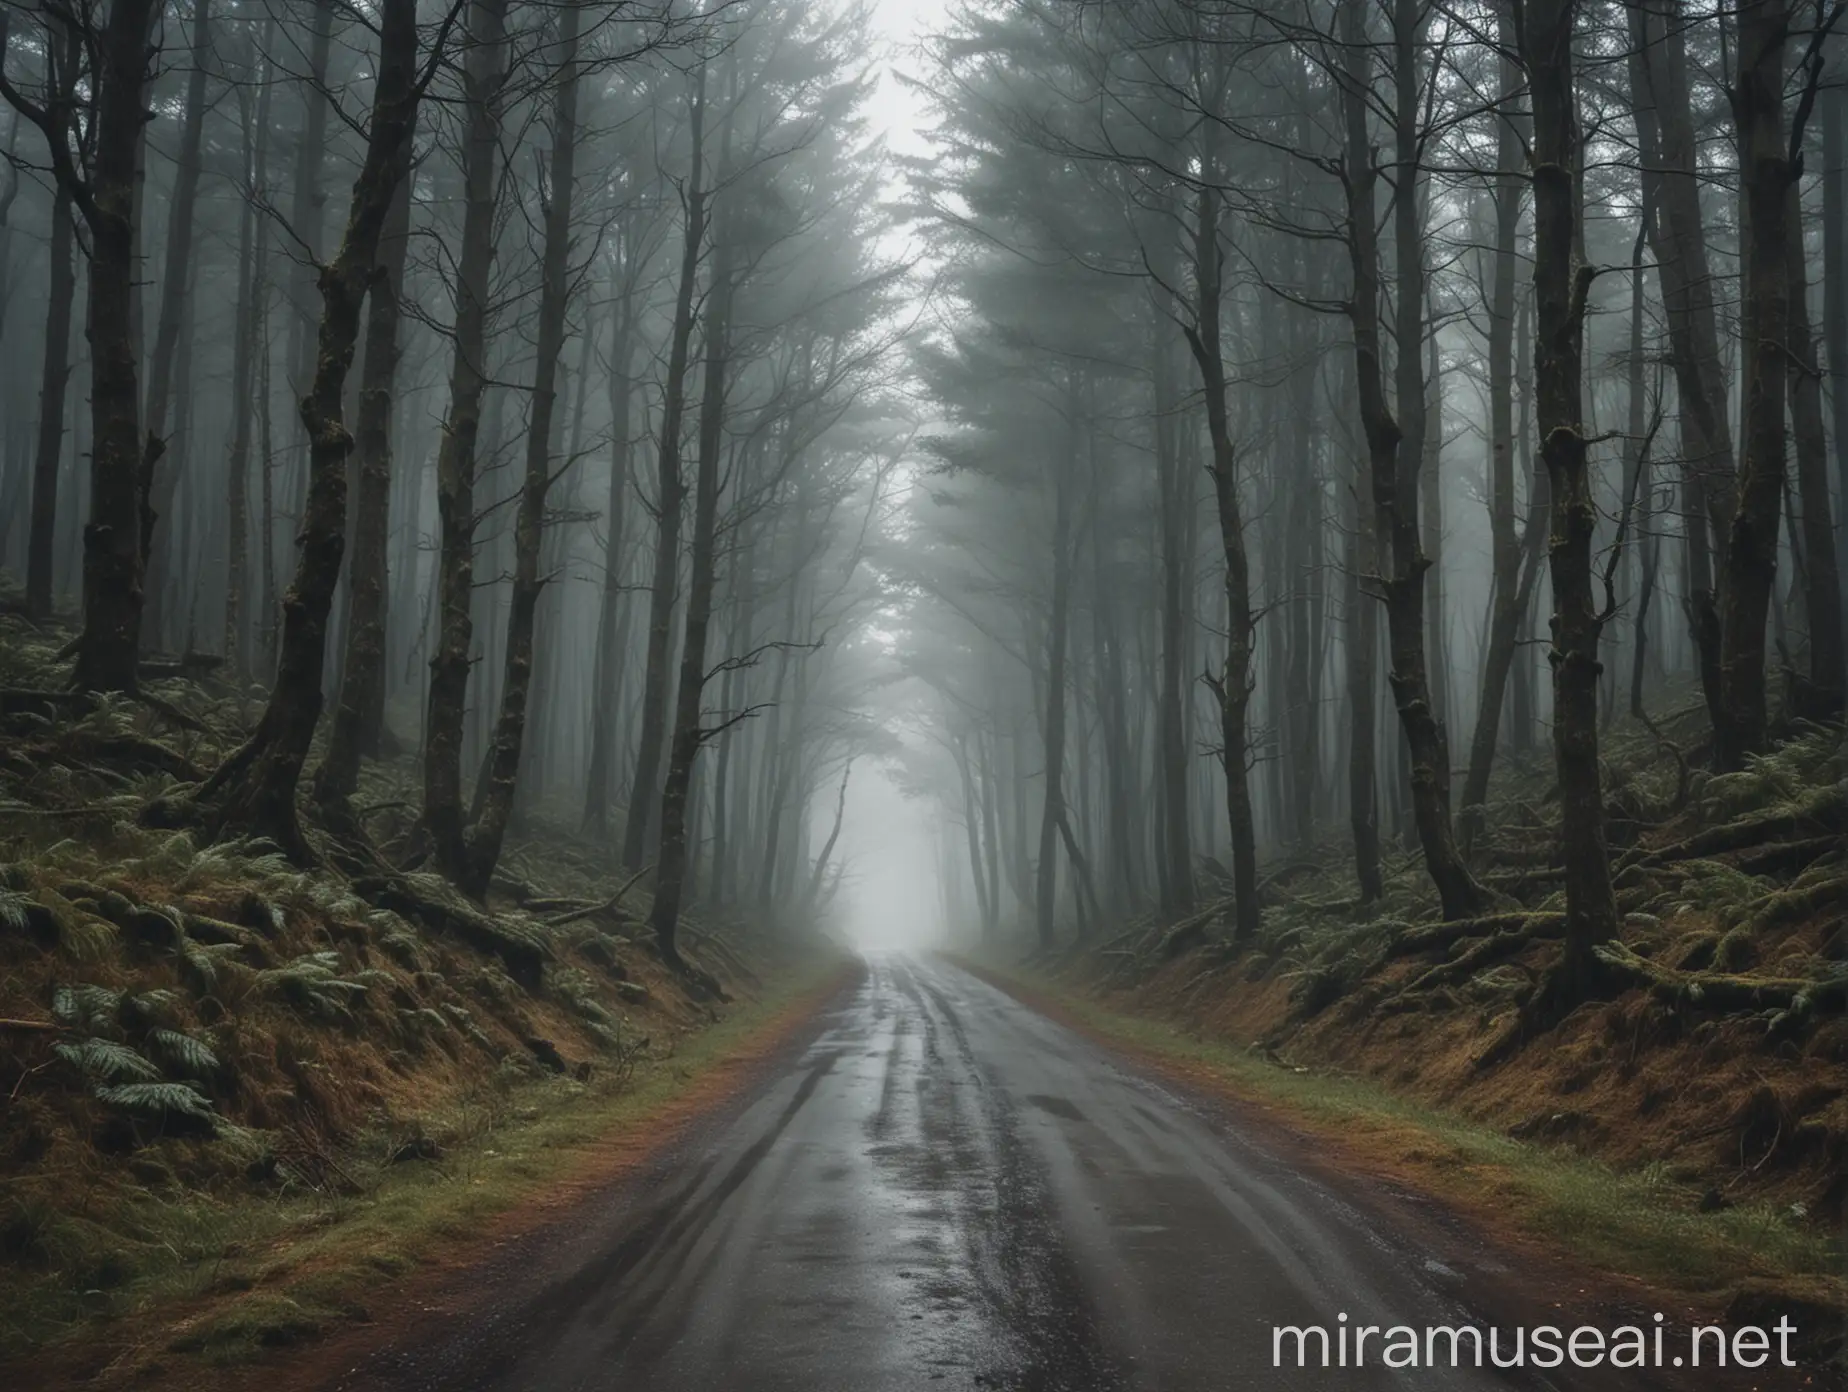 Enchanting Small Road Amidst a Gloomy Forest